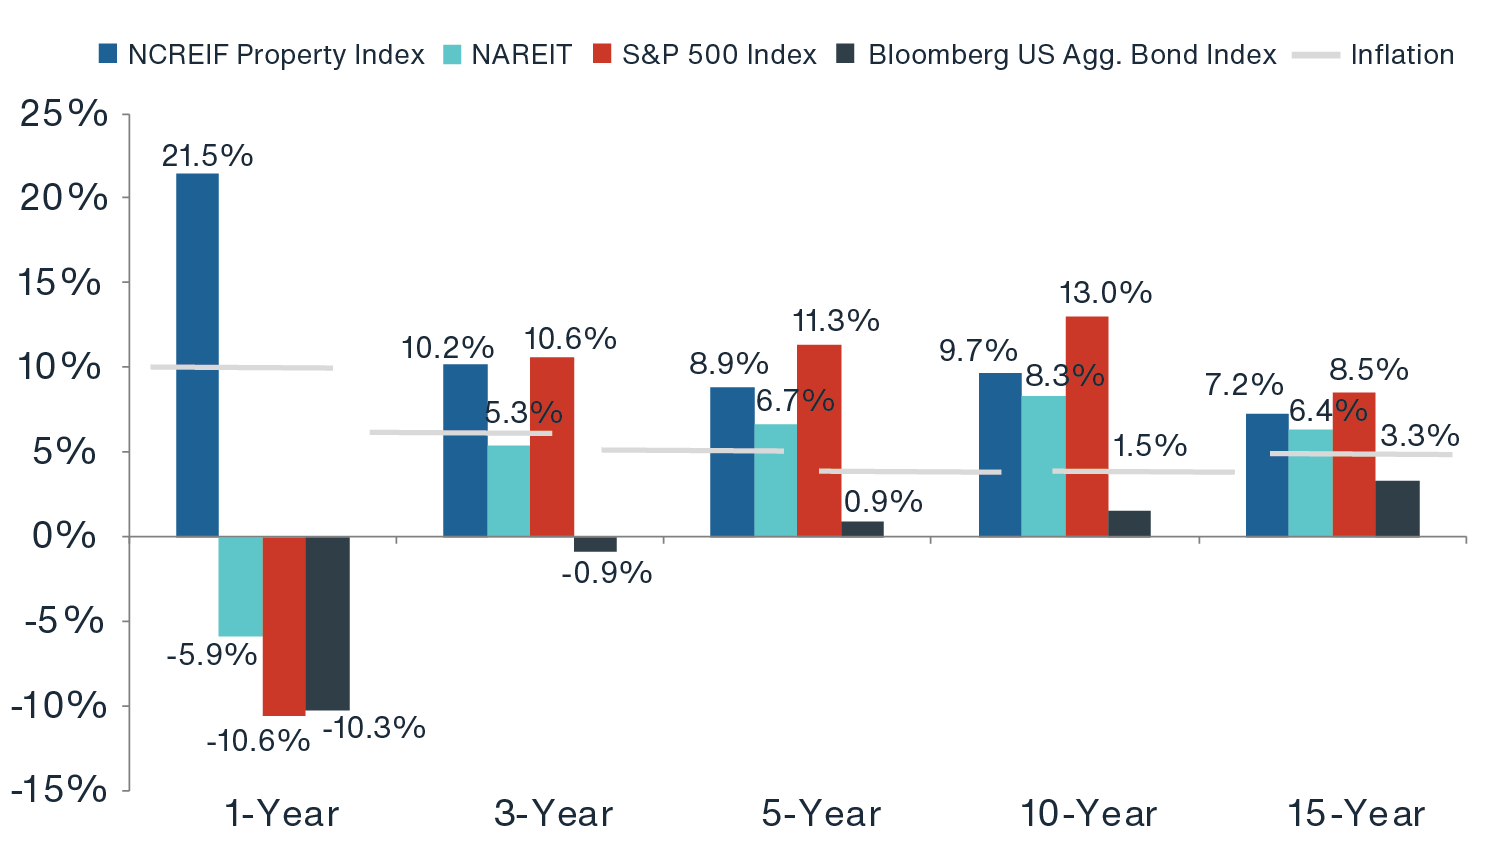 Chart showing strong NPI total return performance over the past year, outperforming the FTSE NAREIT All Equity Index, S&P 500 